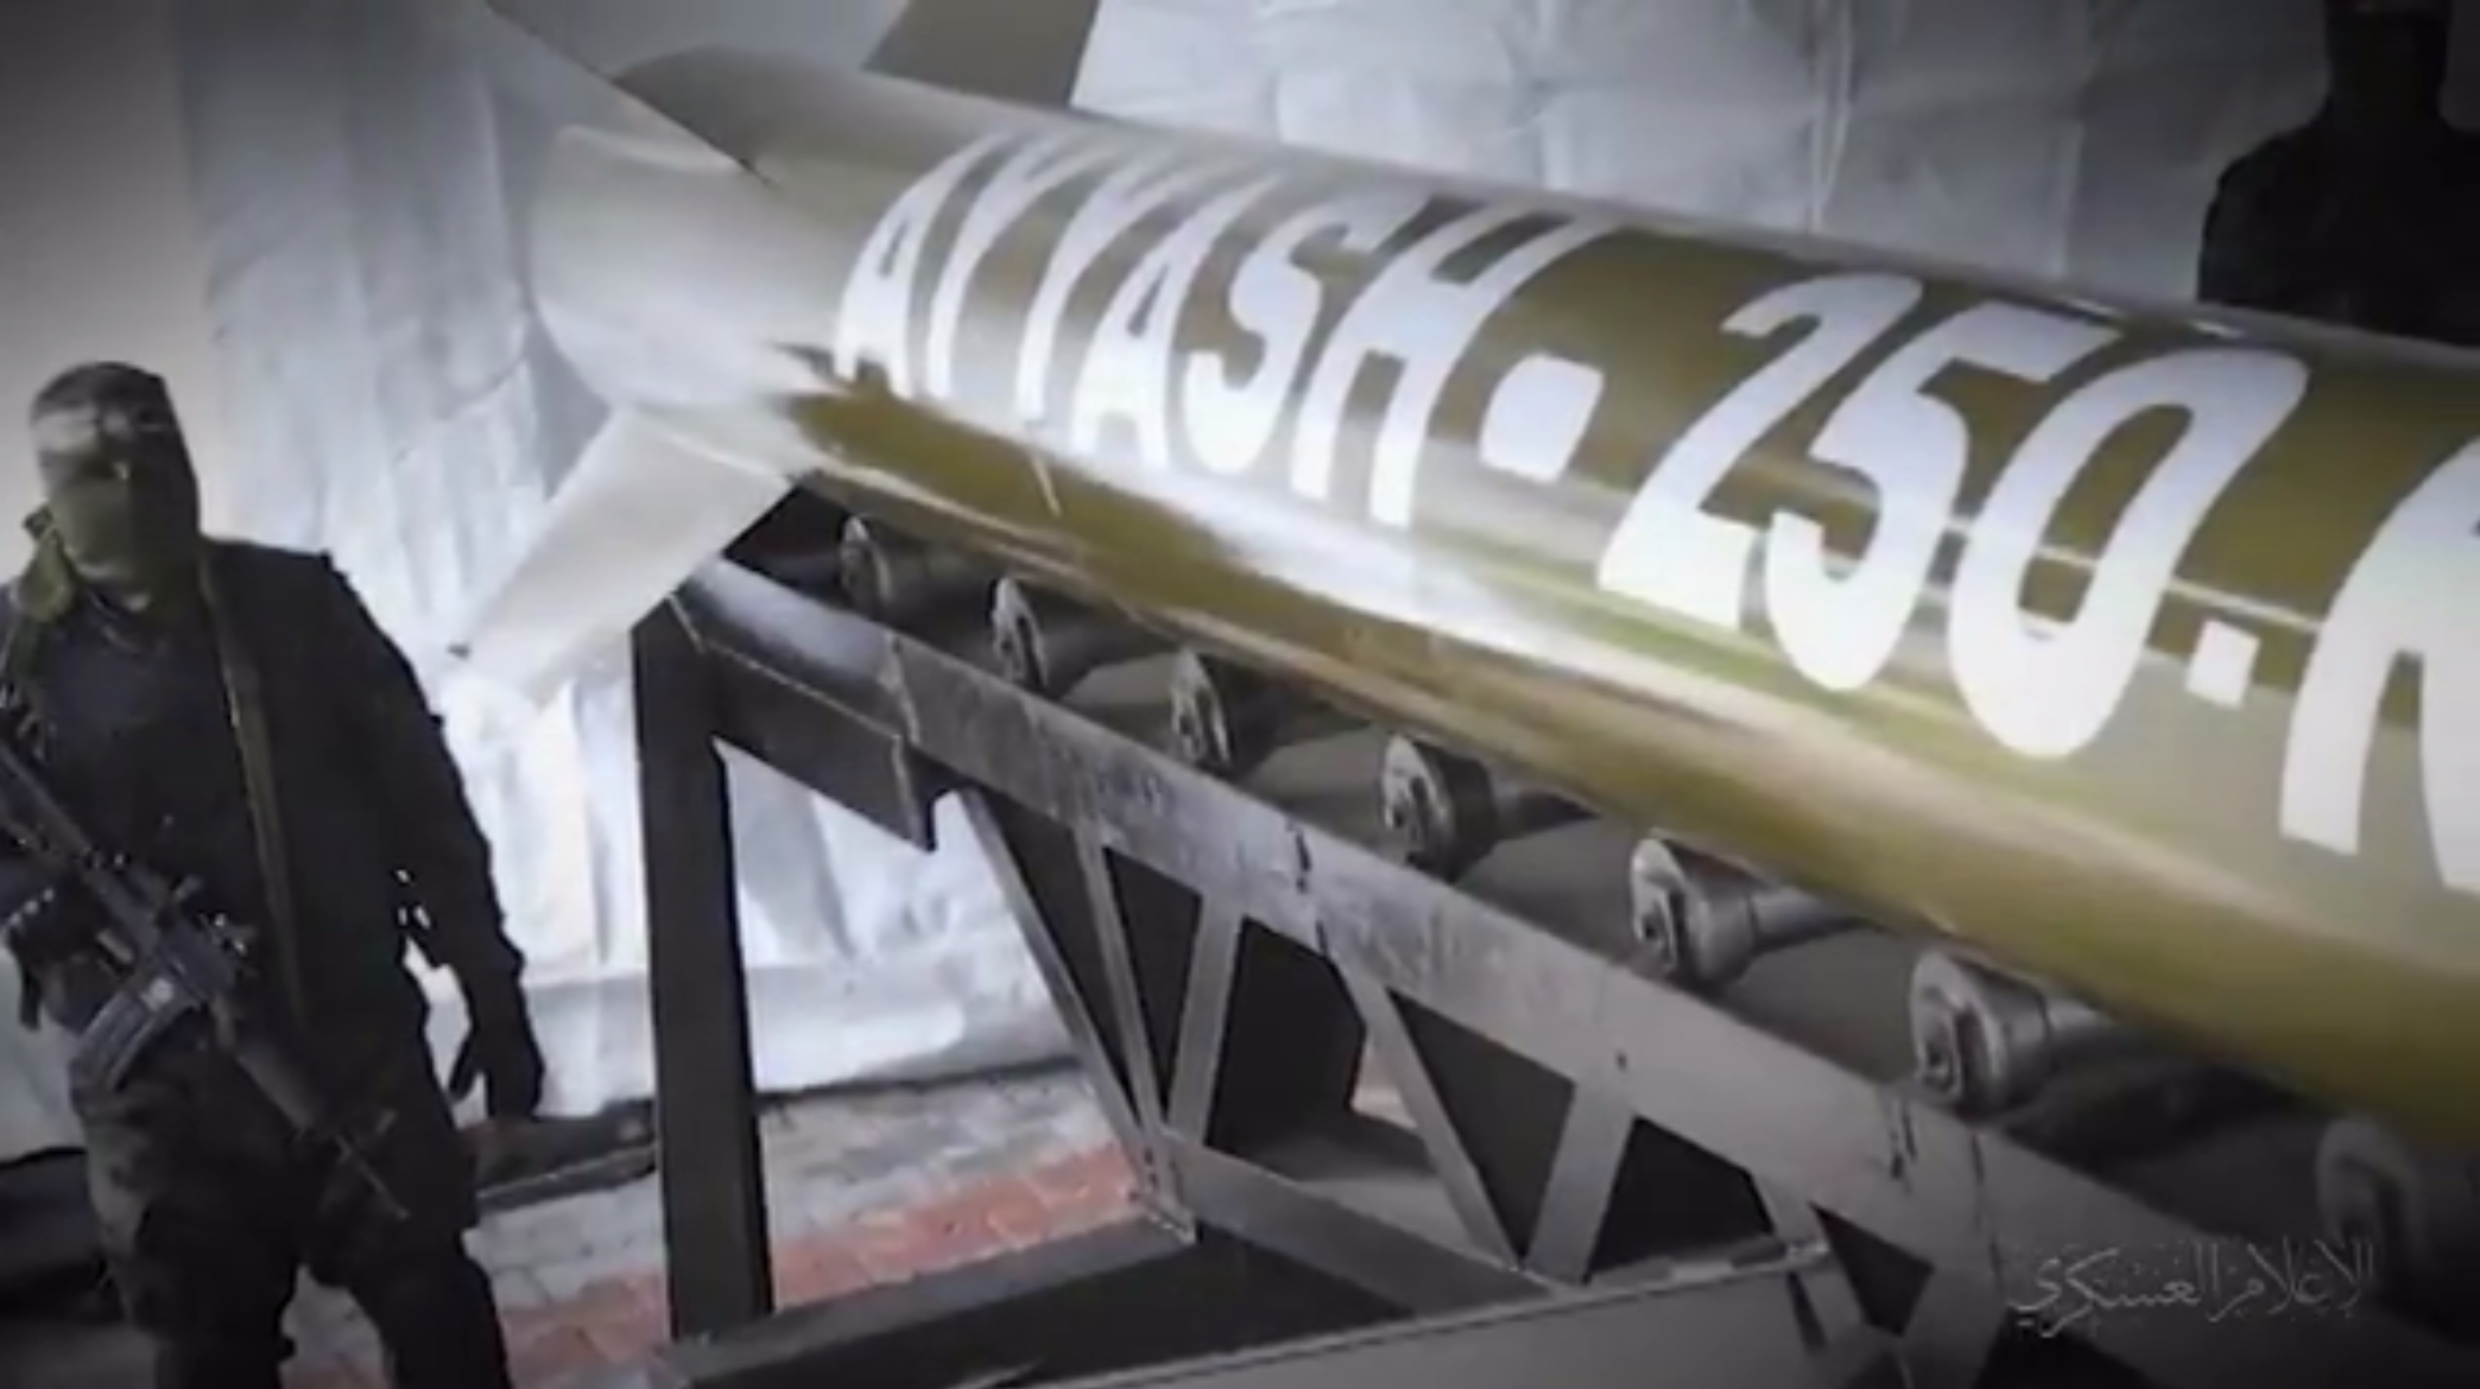 In this video released in May 2021, Hamas presents its “Ayyash 250” rocket, which is actually an Iranian Zelzal-generation rocket.